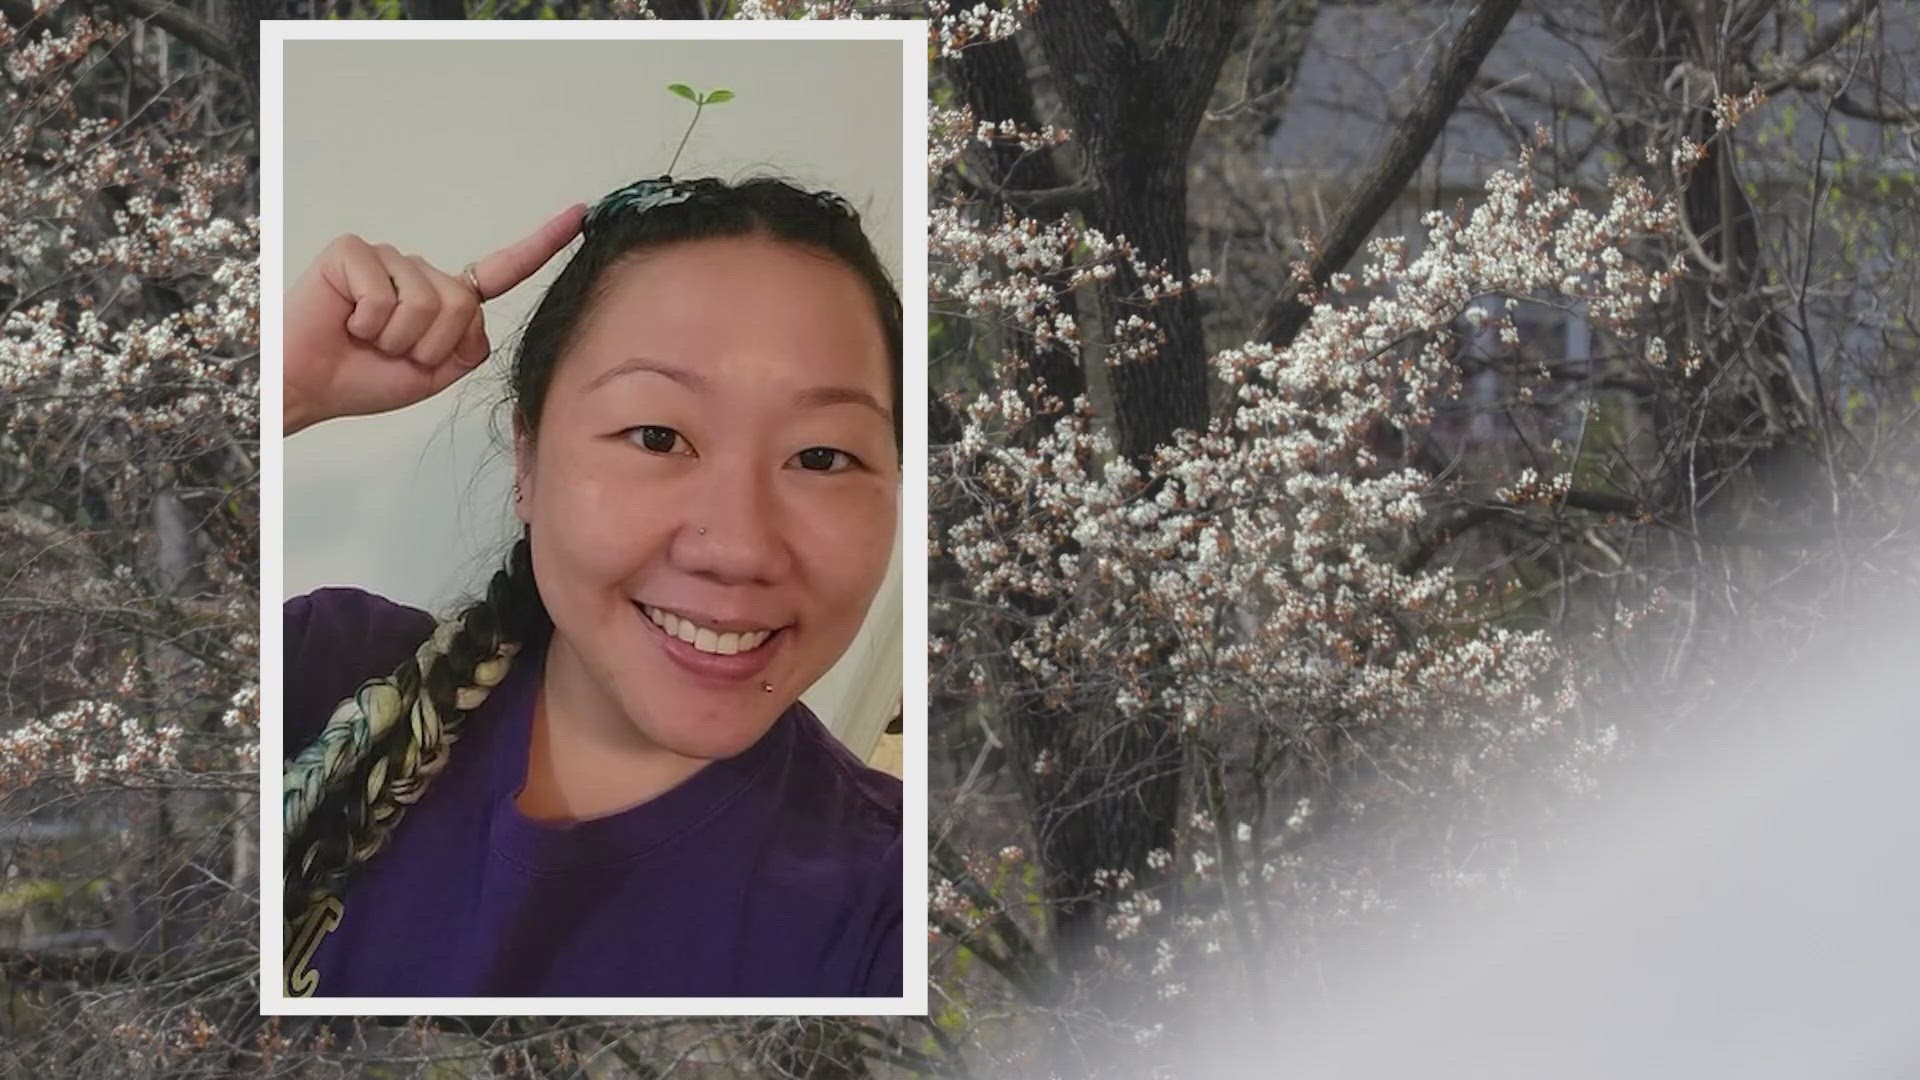 Family and friends are preparing to honor Christy Bautista this weekend to mark one year since she was brutally killed inside a D.C. hotel room.